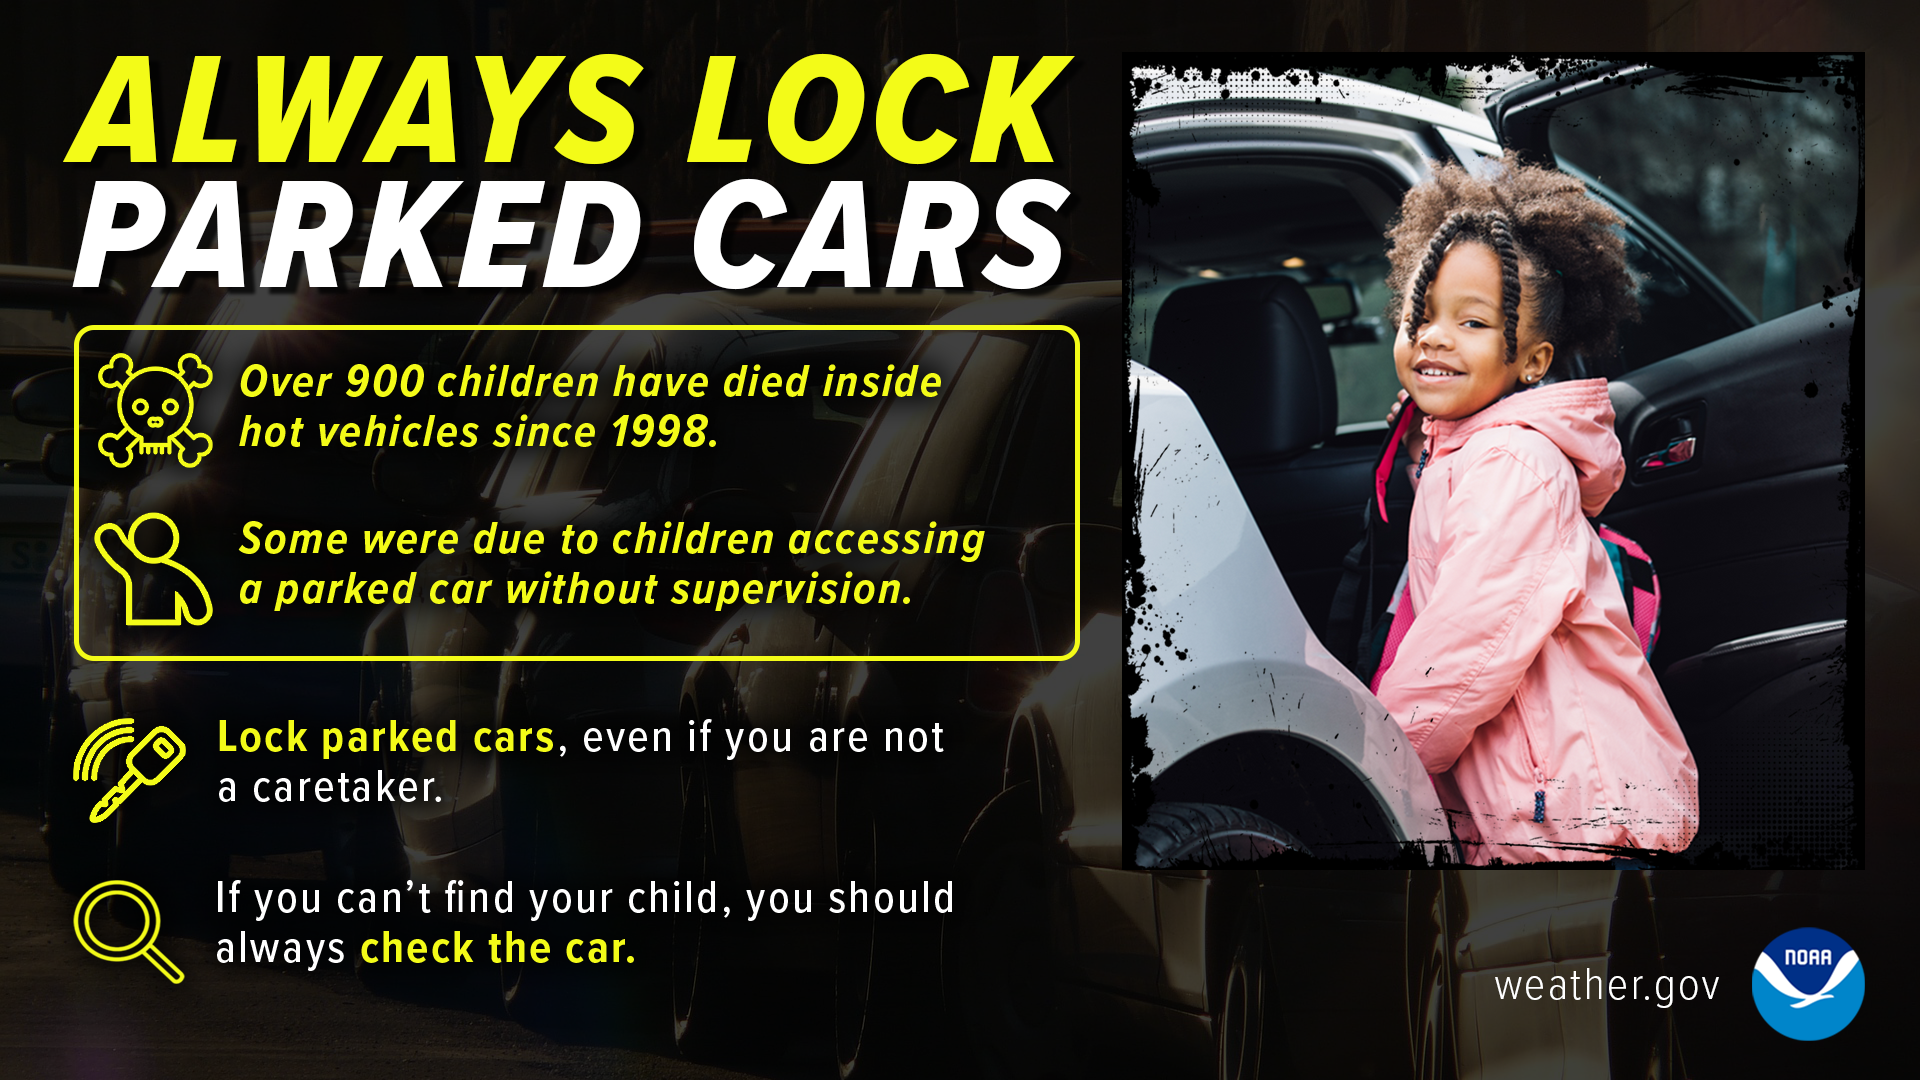 Always lock parked cars. Over 900 children have died inside hot vehicles since 1998. Some were due to children accessing a parked car without supervision. Lock parked cars, even if you are not a caretaker. If you can't find your child, you should always check the car.